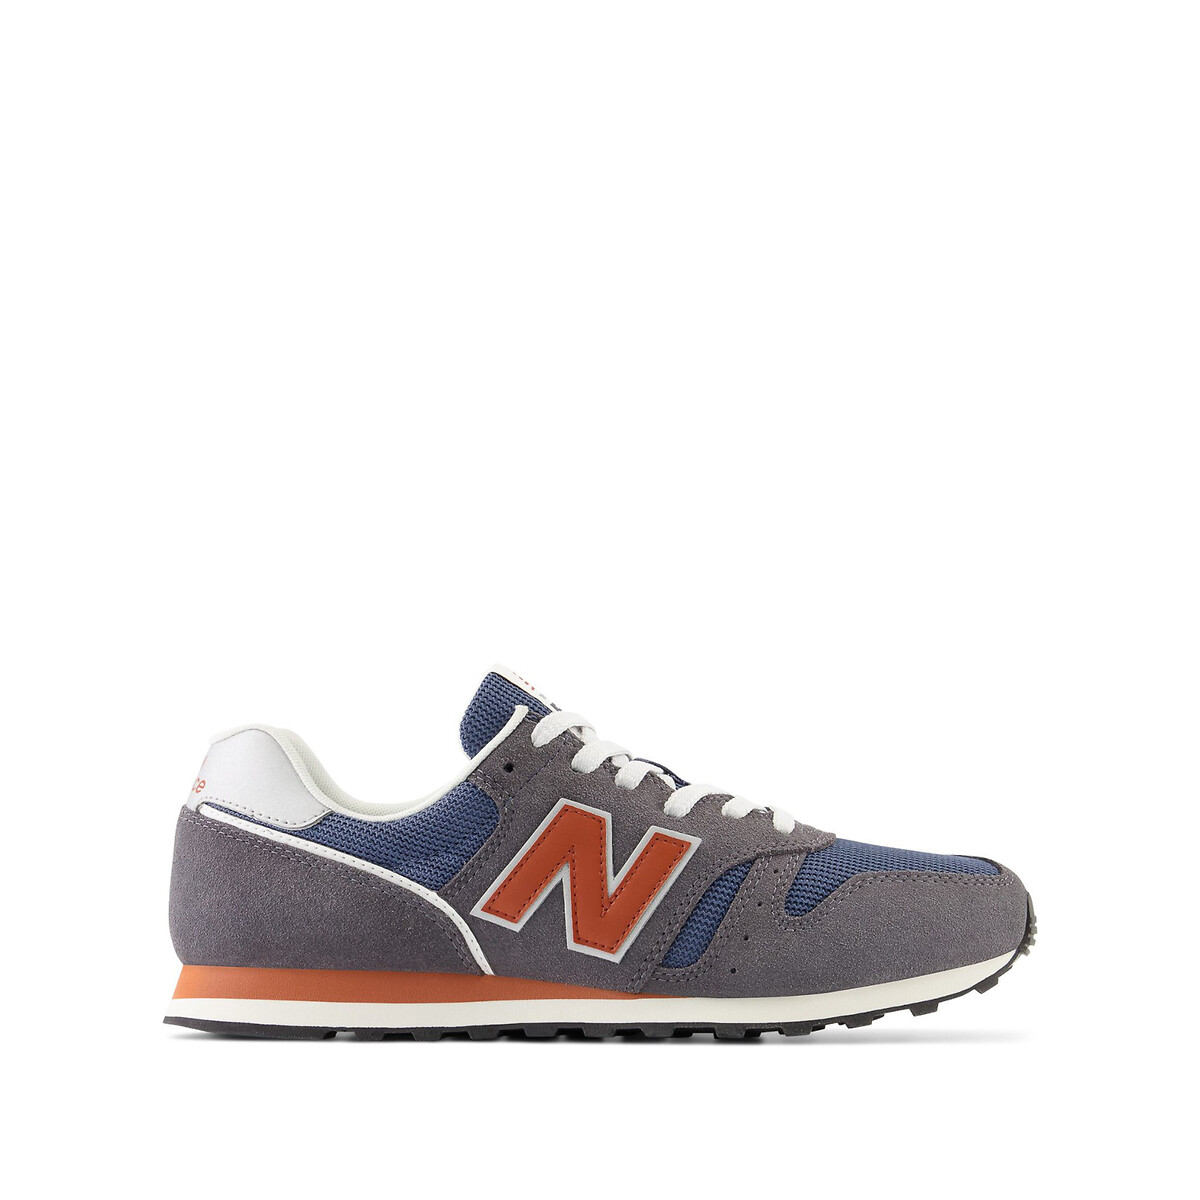 Ml373 leather trainers, charcoal, New Balance | La Redoute